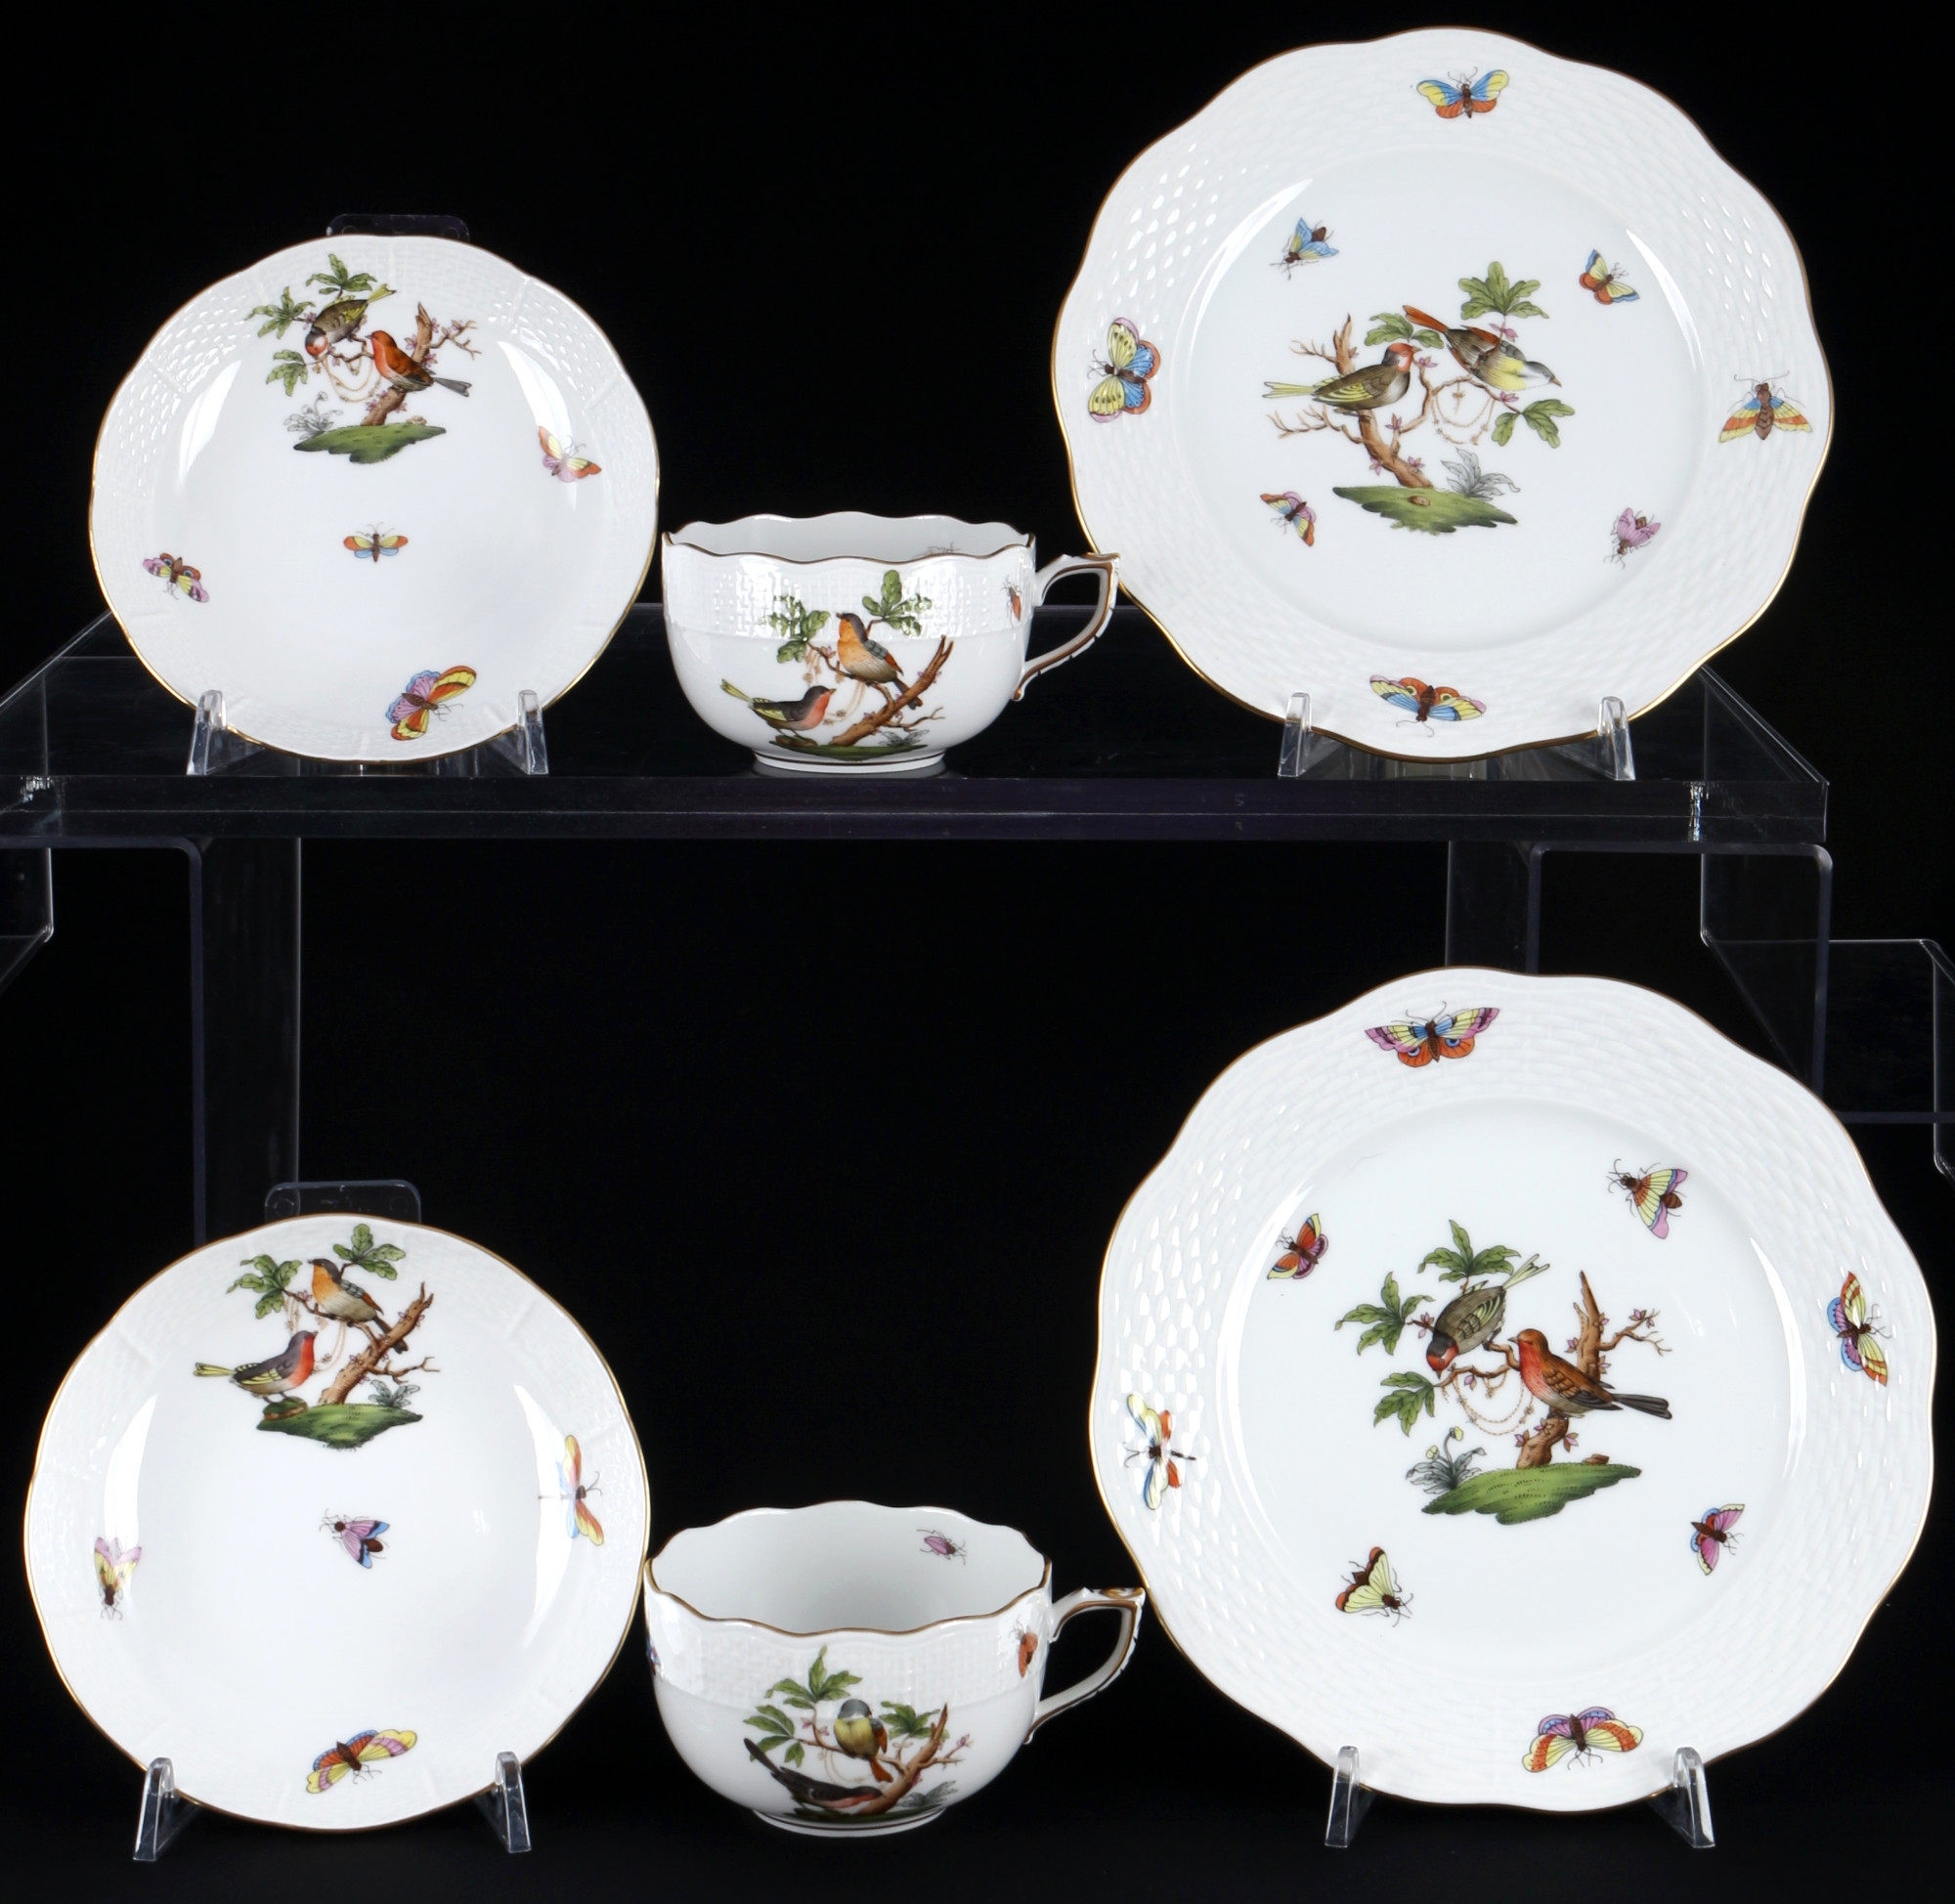 Herend Rothschild tea service for 6 persons, Teeservice für 6 Personen, - Image 7 of 10